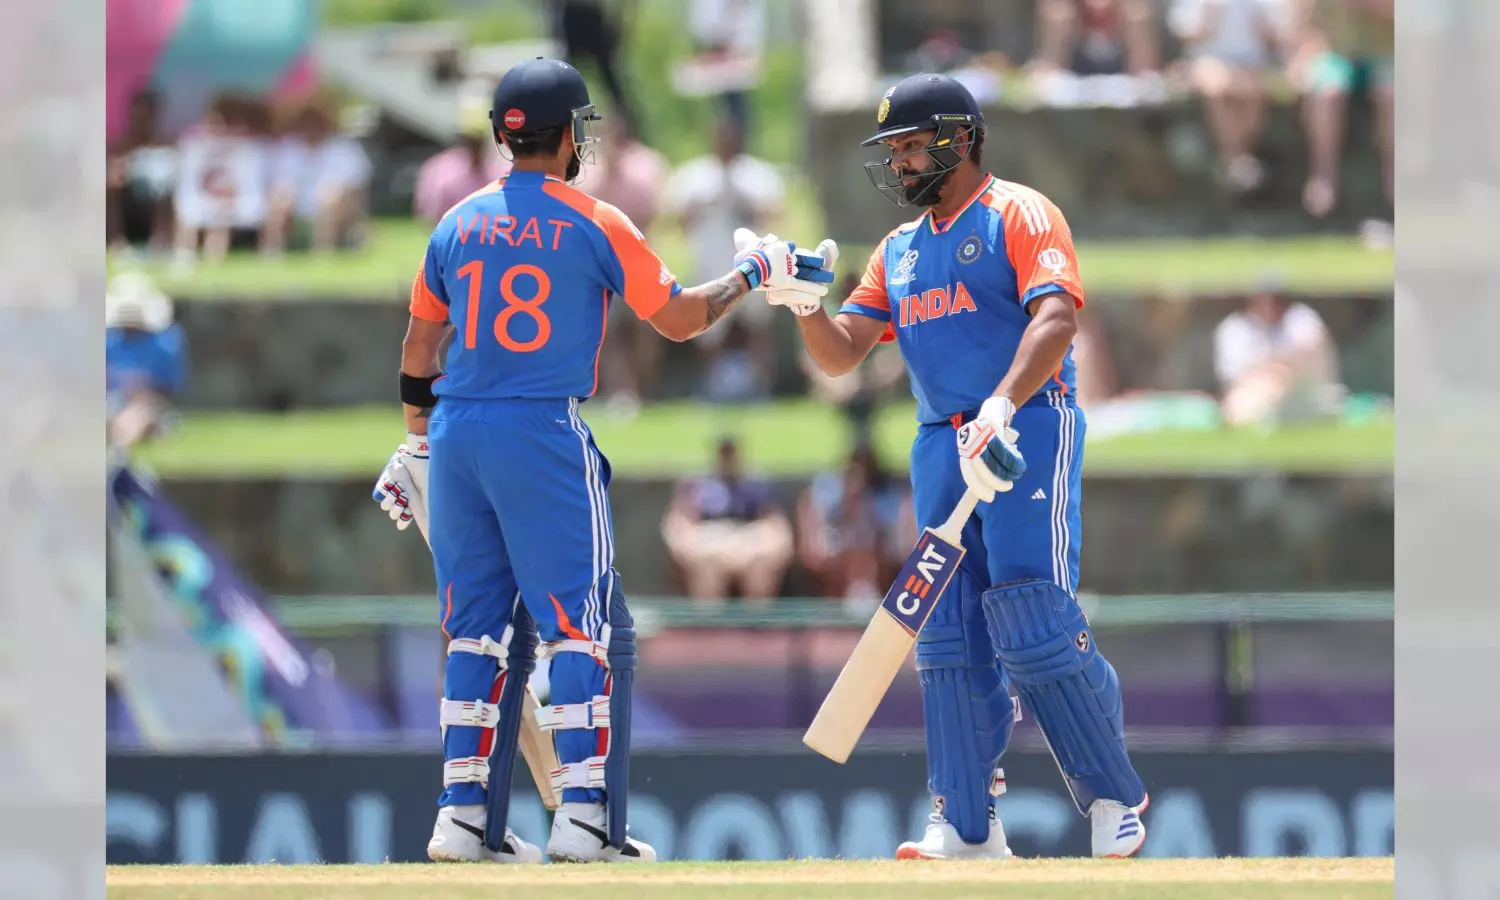 T20 World Cup: Can India upset Australia? Heres our take!